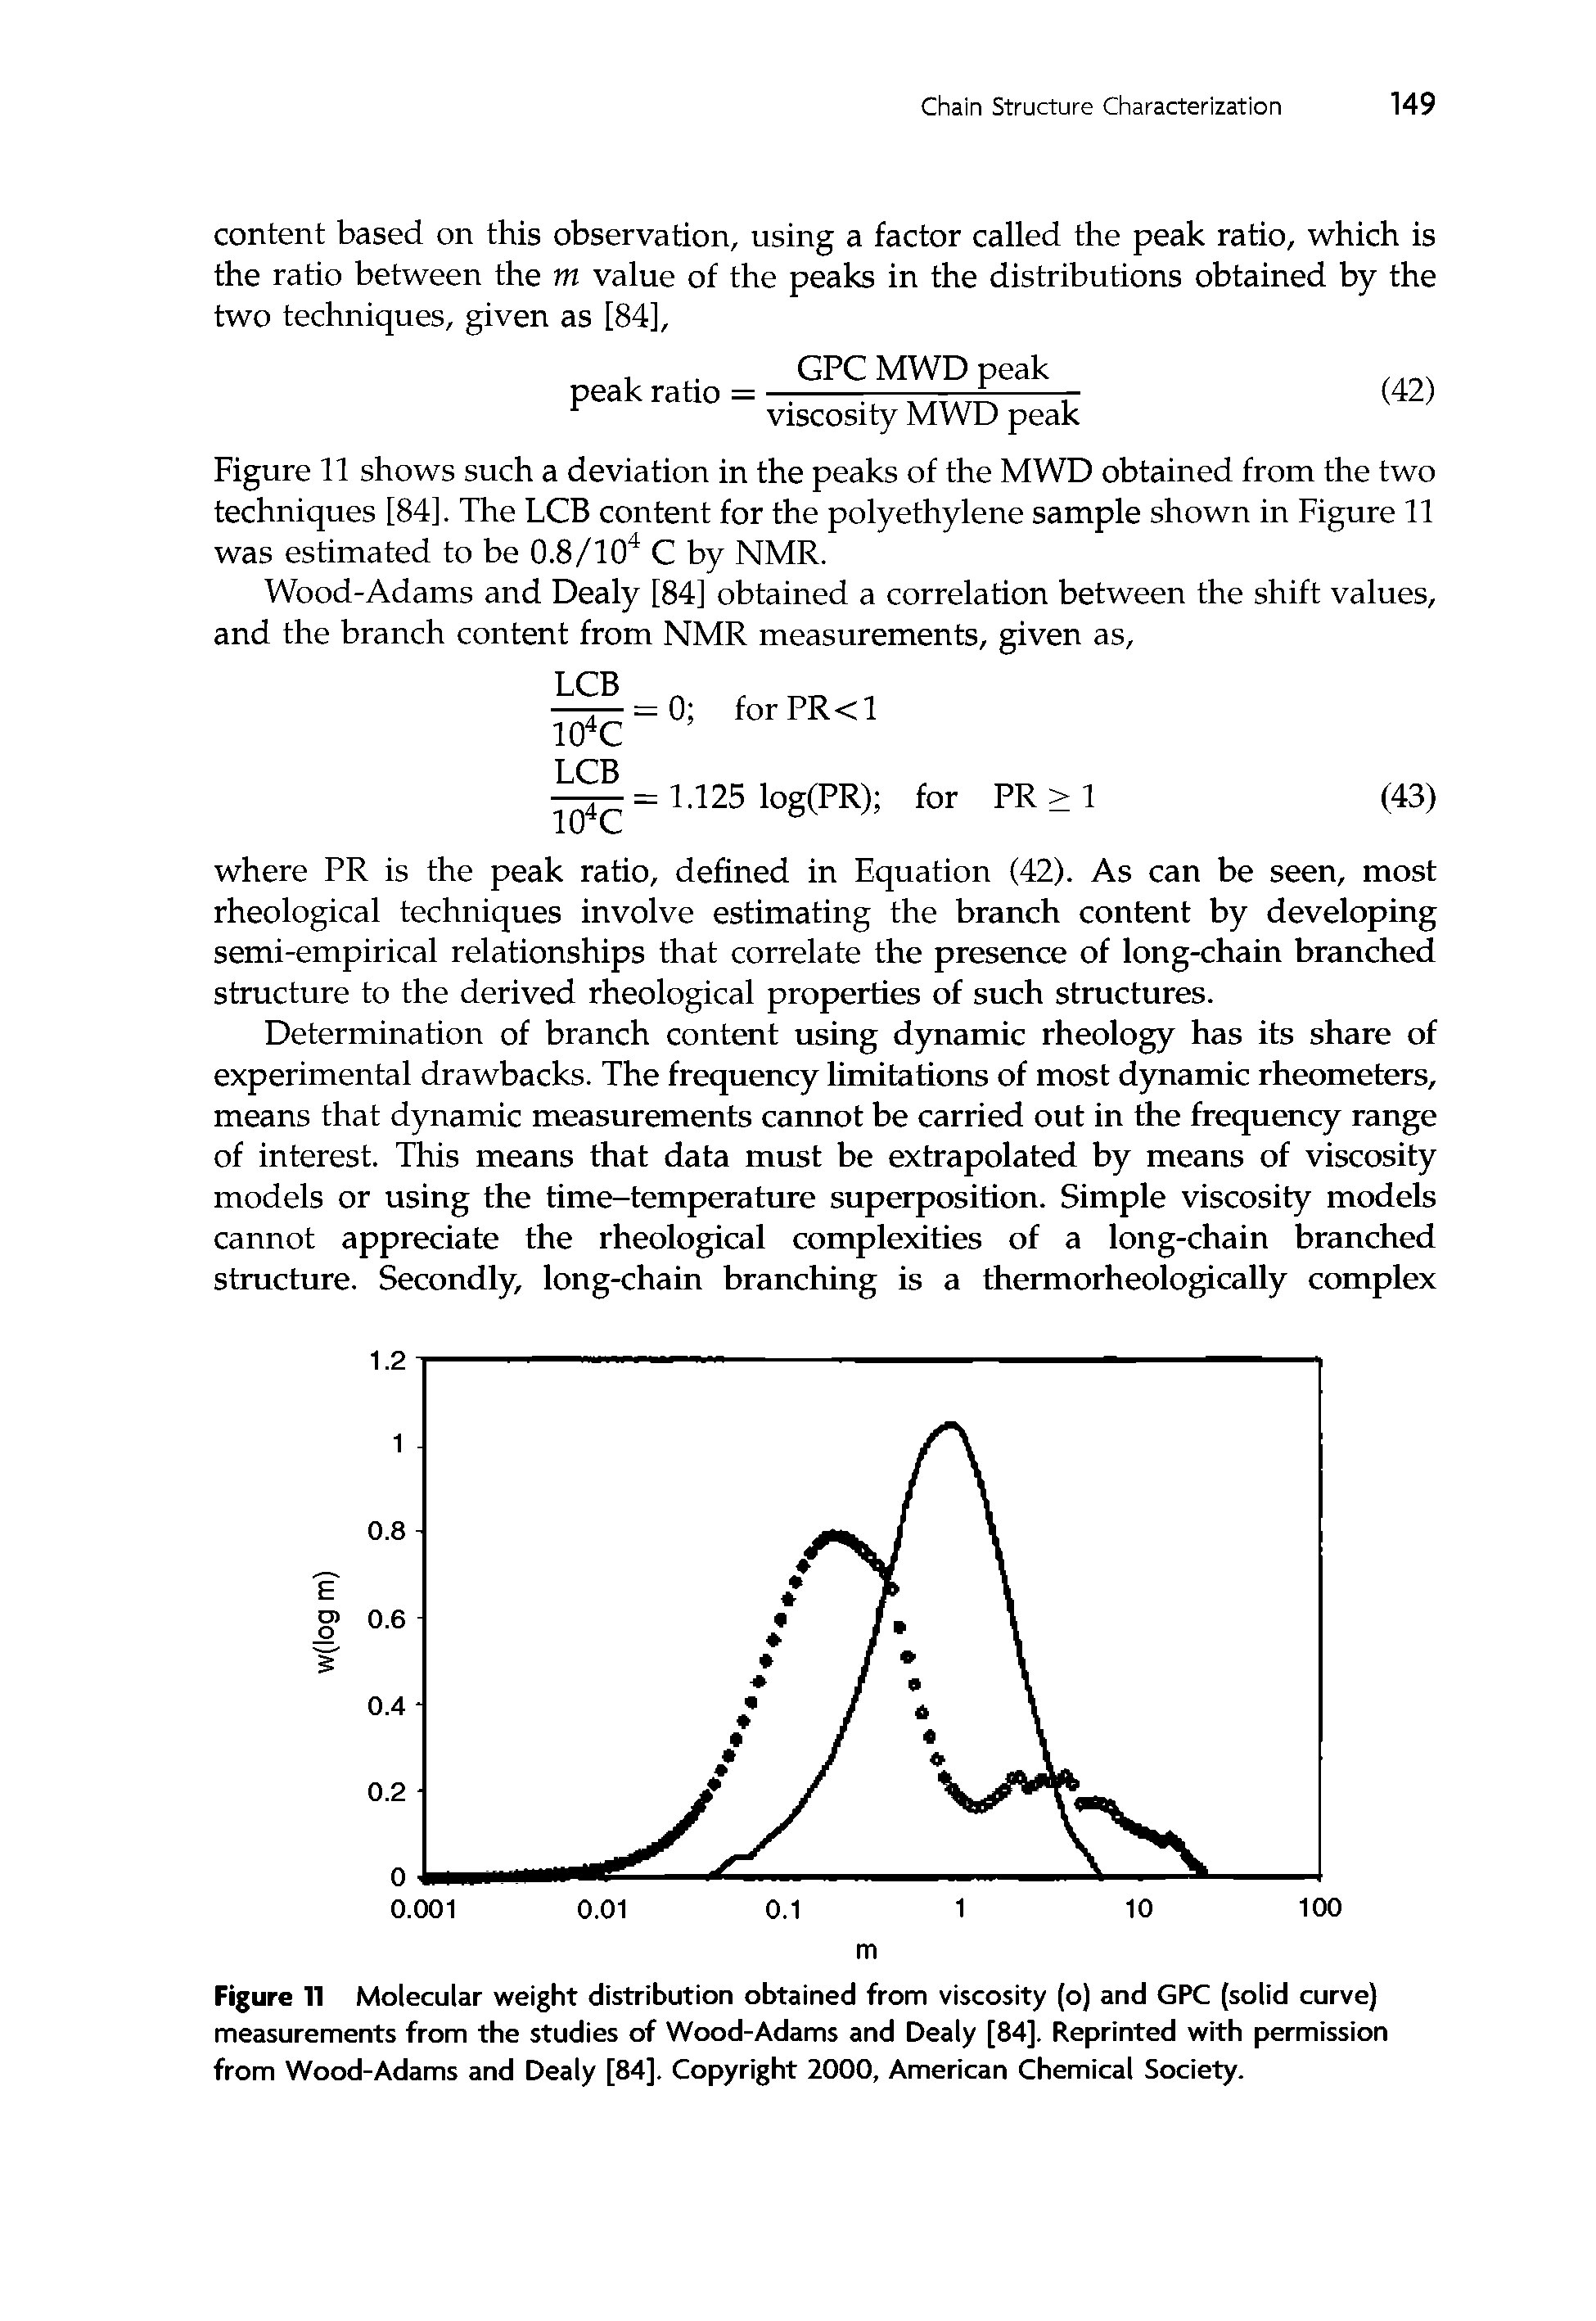 Figure 11 Molecular weight distribution obtained from viscosity (o) and GPC (solid curve) measurements from the studies of Wood-Adams and Dealy [84]. Reprinted with permission from Wood-Adams and Dealy [84]. Copyright 2000, American Chemical Society.